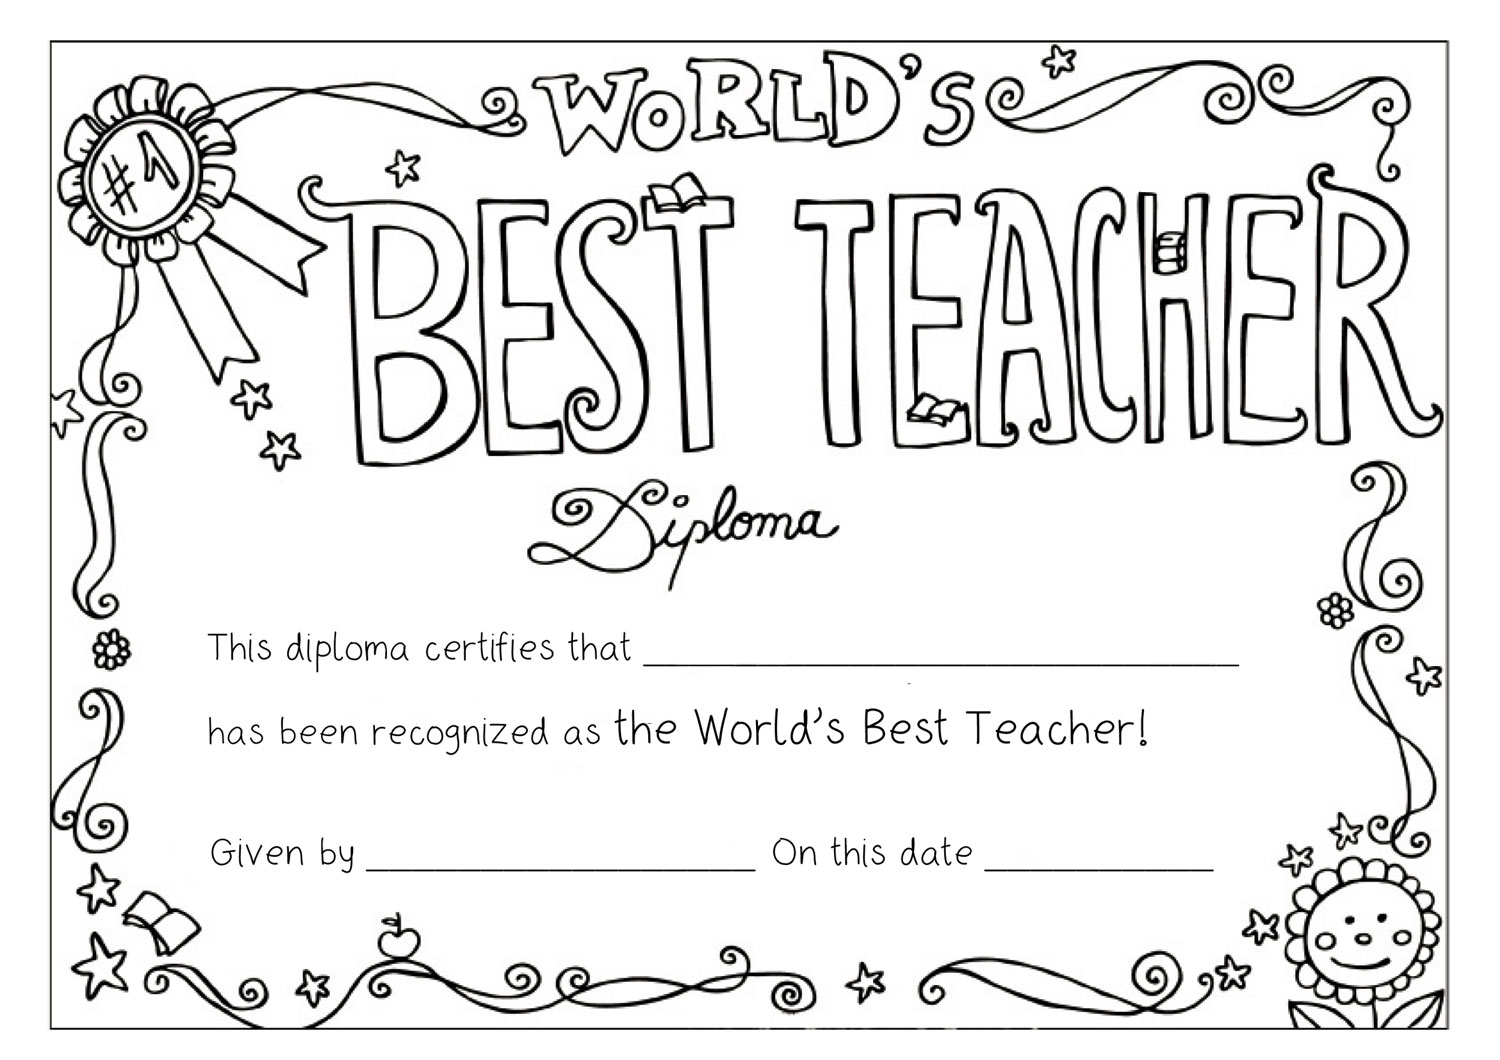 teacher-coloring-pages-best-coloring-pages-for-kids